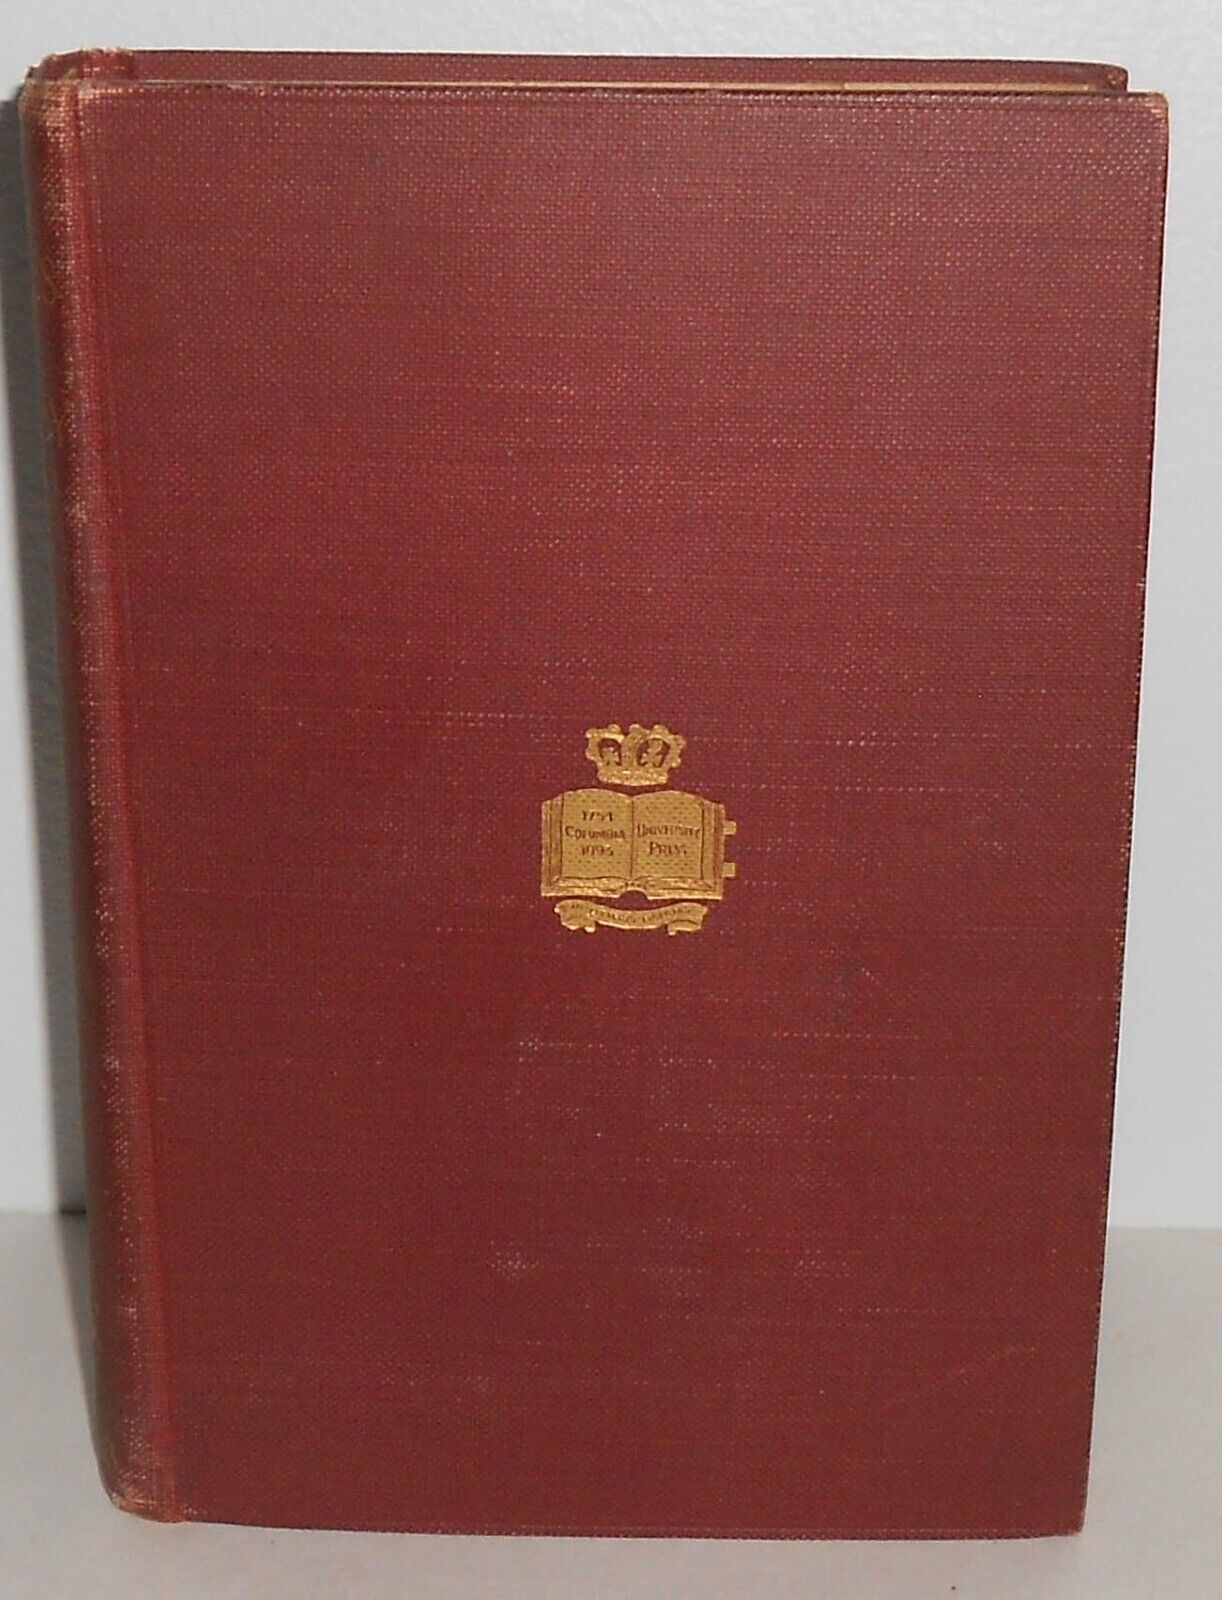 1896 THE PRINCIPLES OF SOCIOLOGY by Franklin Henry Giddings ANTIQUE Textbook HB